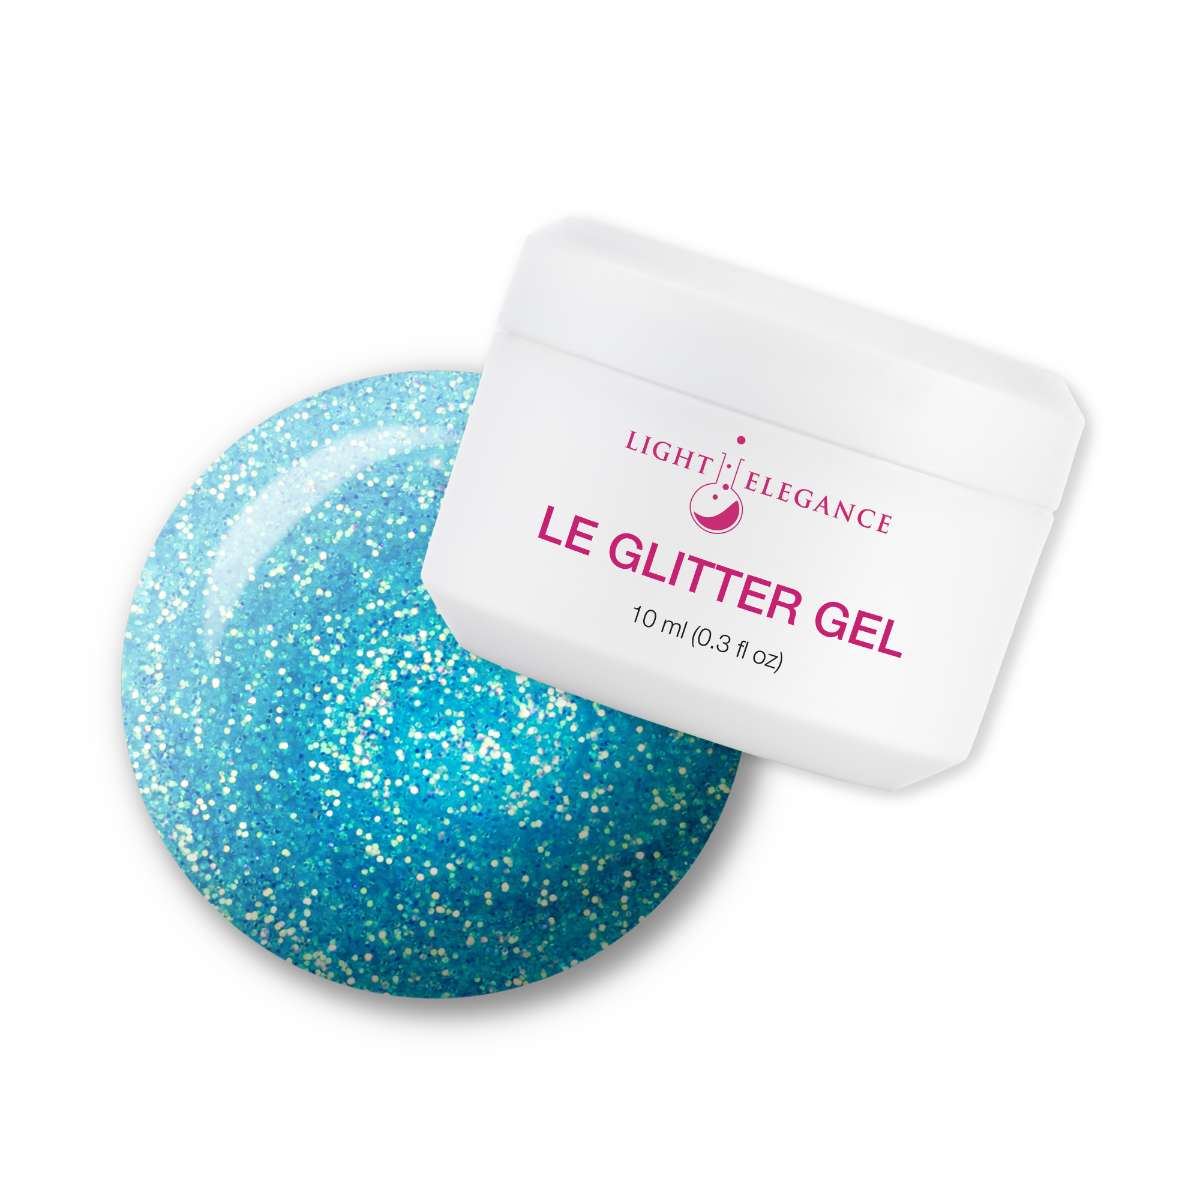 Light Elegance Glitter Gel - Snow Cone :: New Packaging - Creata Beauty - Professional Beauty Products